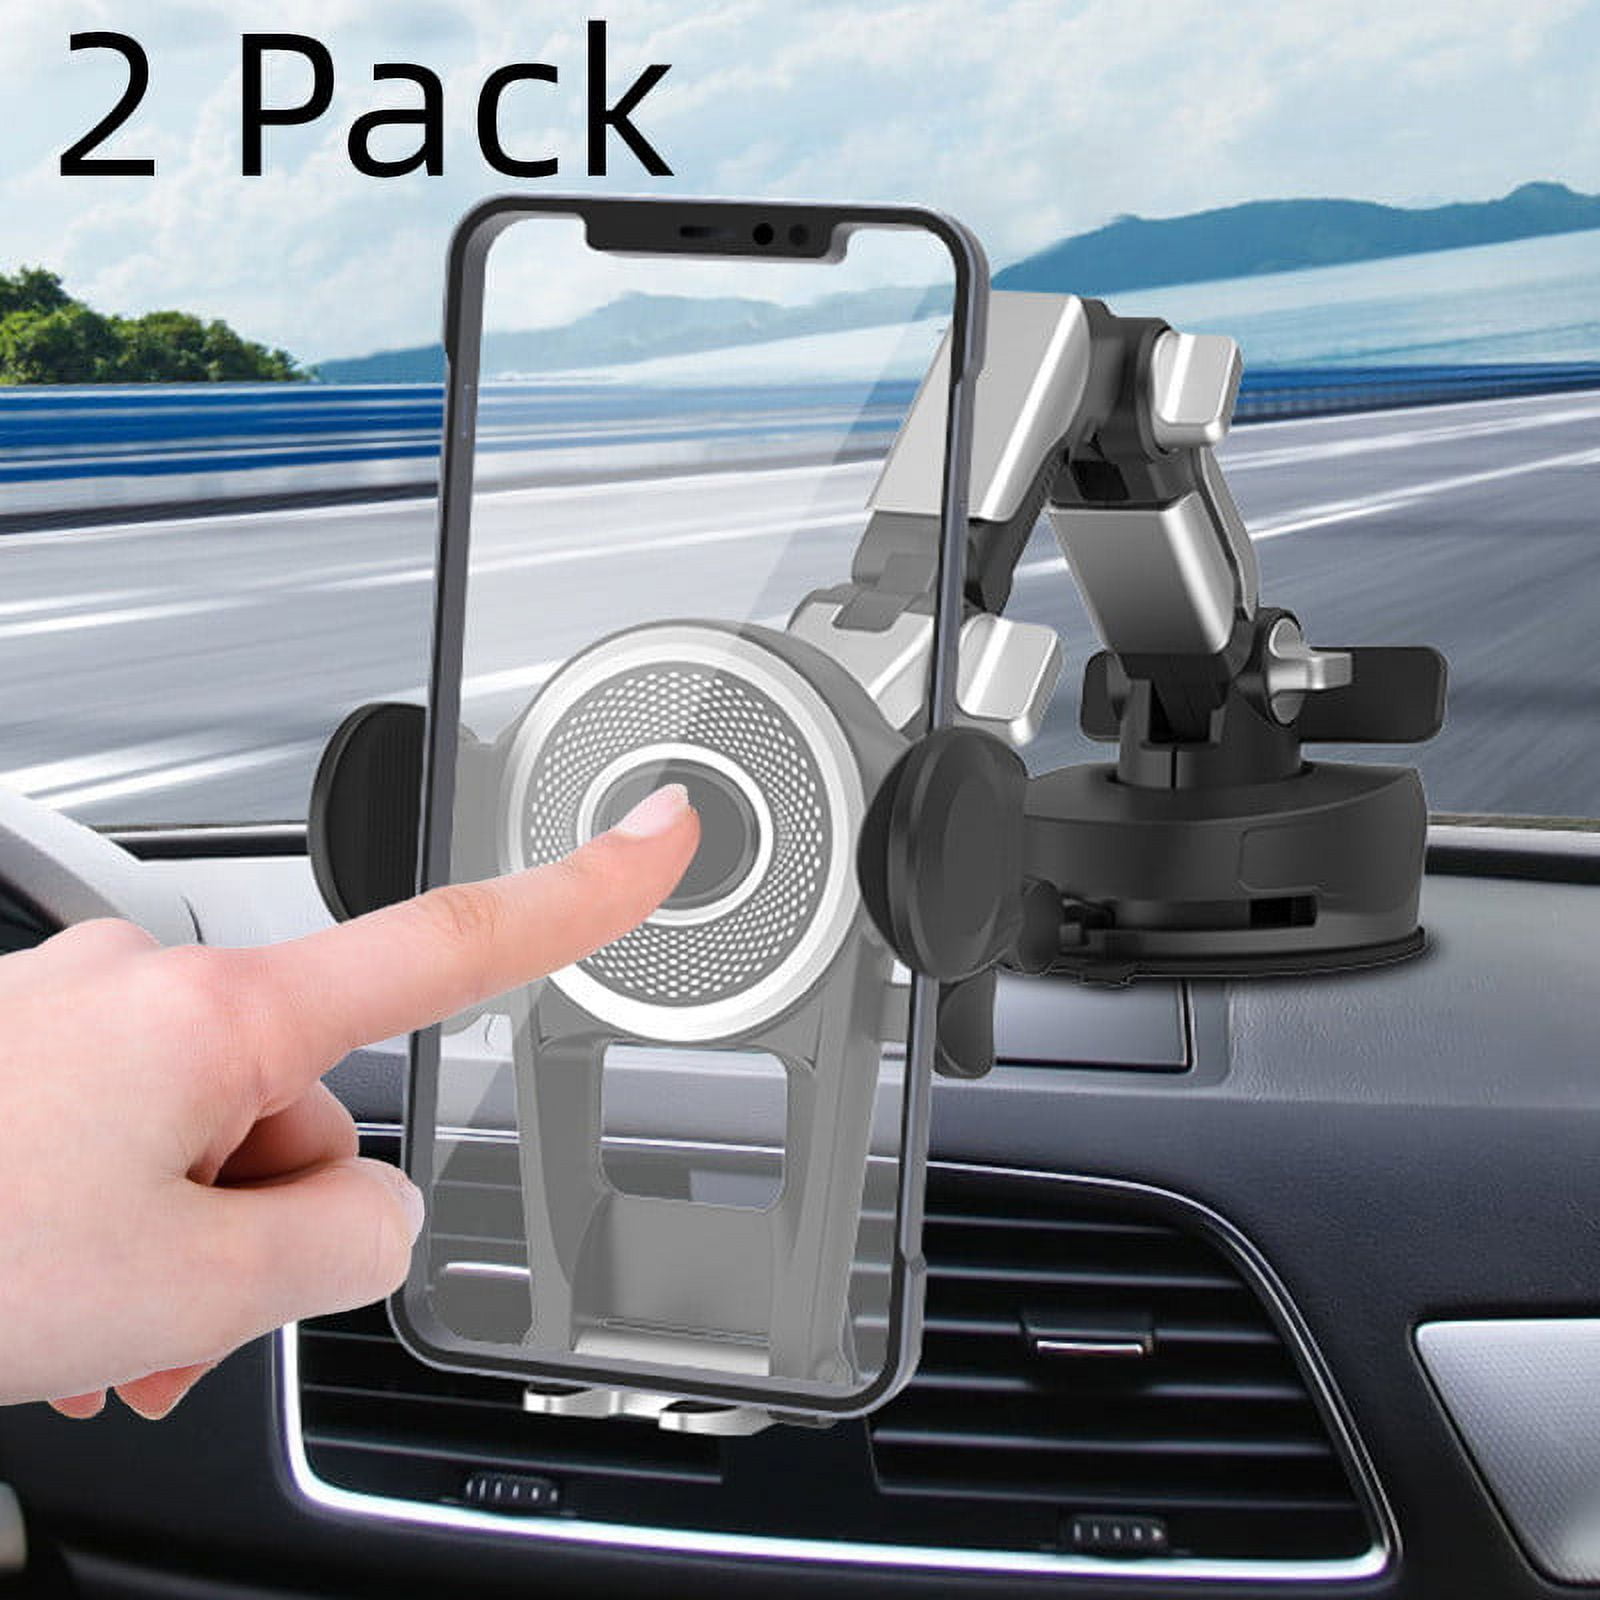 2 Pack Truck Phone Holder Mount, Heavy Duty Cell Phone Holder for Car  Dashboard Windshield Long Arm, Strength Suction Cup Anti-Shake Stabilize Car  Phone Holder Suitable for All Cell Phones, Black 